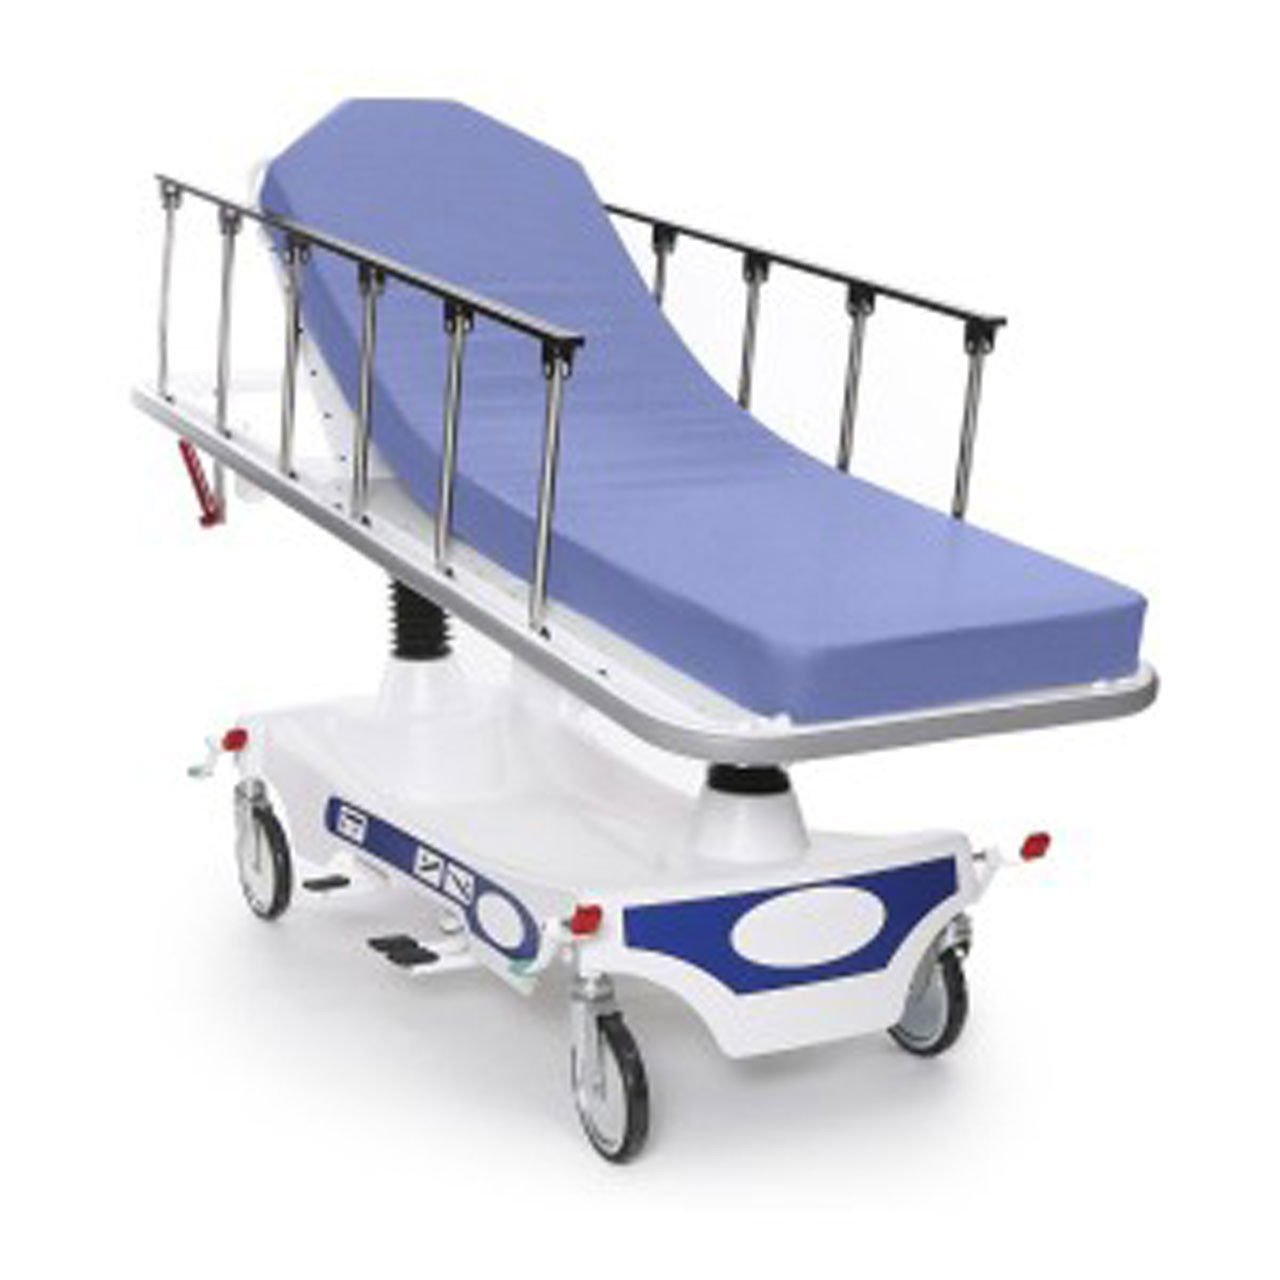 From where are these stretcher sheets shipped from?